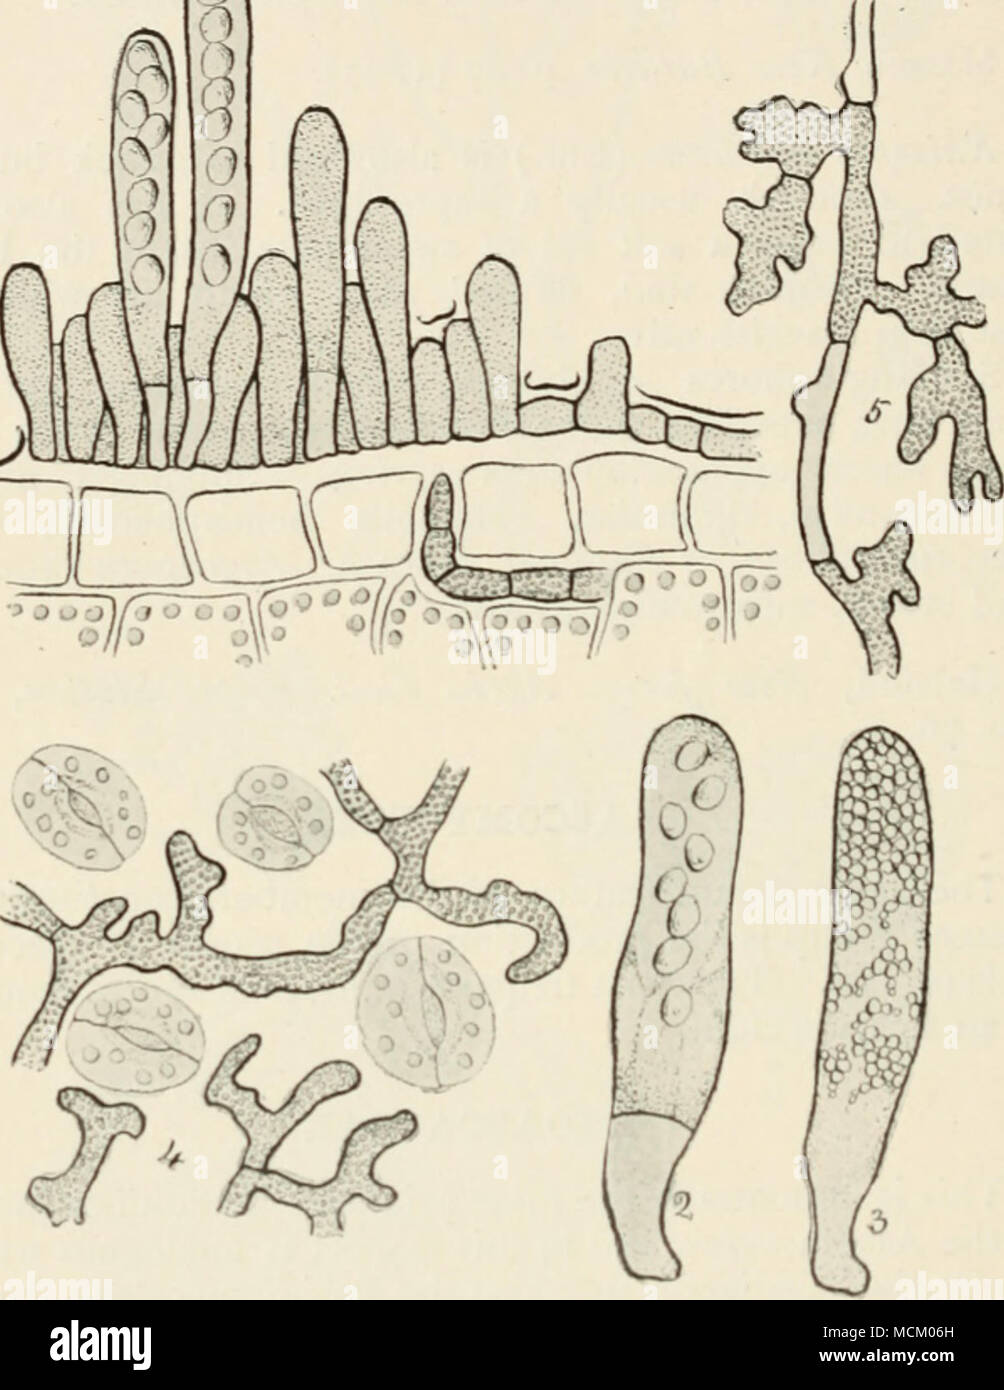 . Fig. 31. I, lixoascus deformans, sliowing asci in various stages of development burslinR through the cuticle of the leaf; 2, ascus of Exoanus pruni, showing stalk-cell at base of ascus, and eight spores; 3, ascus of Taphritia aiirca filled with secondary spores produced by budding of the ascospores ; 4, surface view of niycelium of Taphrina Sadcbcckii on leaf of Almes glutinosa ; 5, differentiation of fertile or ascogenous hyphae from vegetative hyphae of Tuphrina Sadebeckii. (Figs. 4 and 5 after Sadebcck.) All highly mag. upon. The asci at first contain eight spores, but in the majority of  Stock Photo